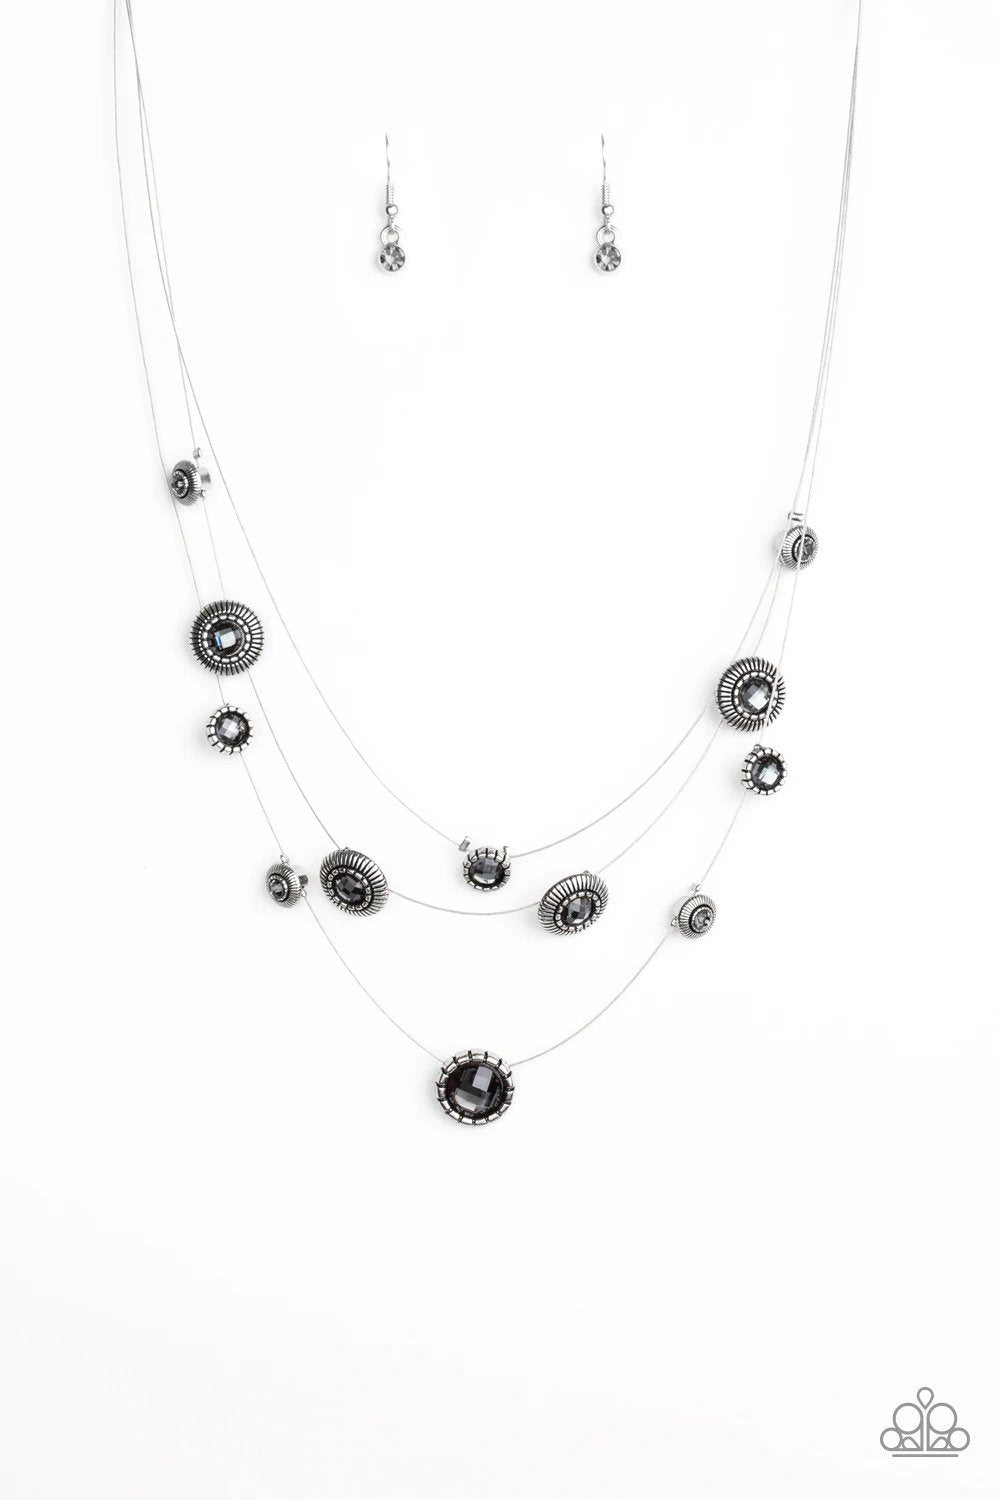 SHEER Thing! Silver Rhinestone Necklace - Paparazzi Accessories - lightbox -CarasShop.com - $5 Jewelry by Cara Jewels